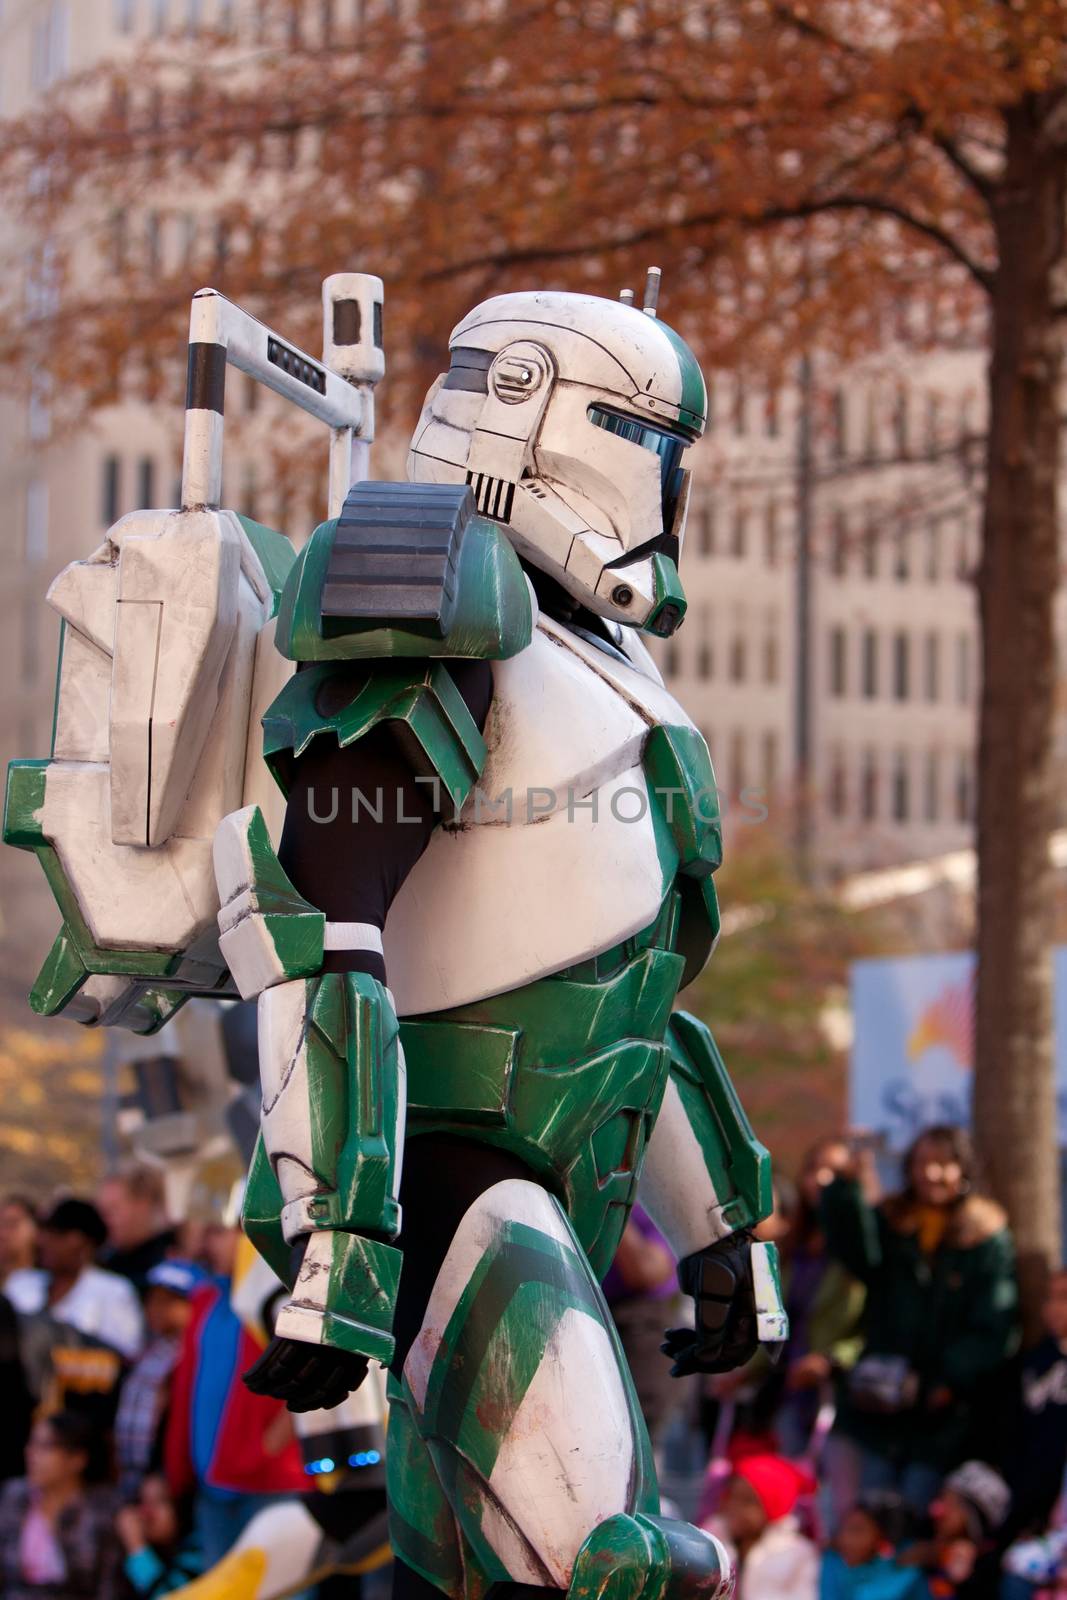 Atlanta, GA, USA - December 1, 2012:  A character from the Star Wars movies walks down Peachtree Street while taking part in the annual Atlanta Christmas parade in downtown Atlanta.